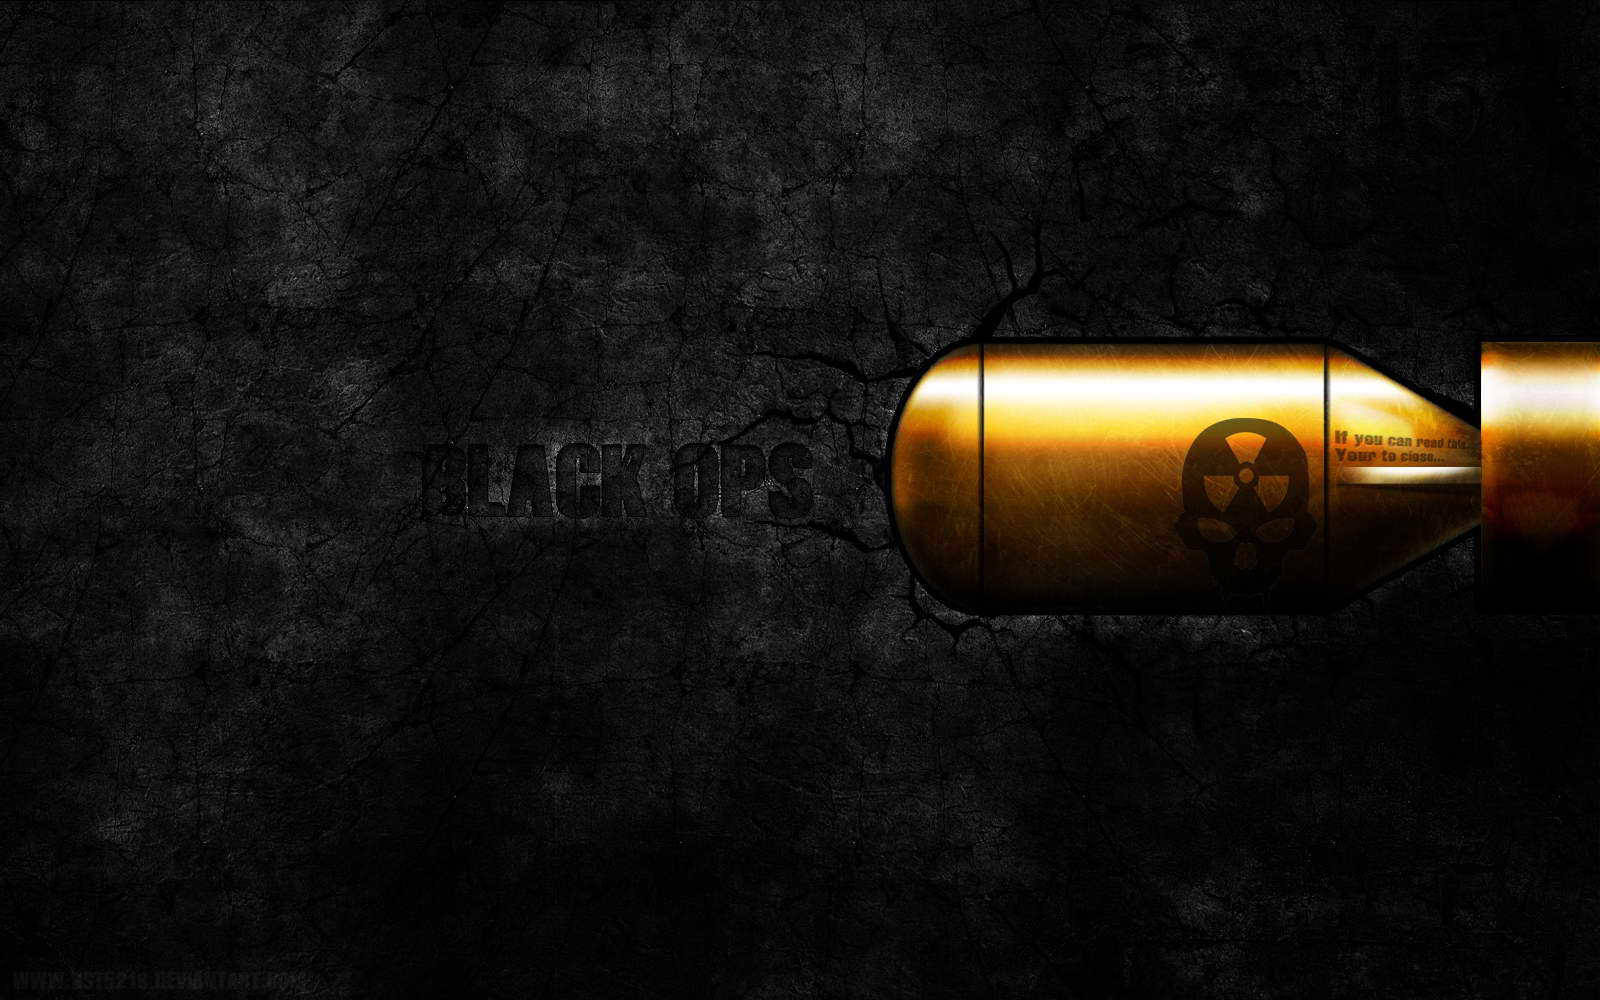 COD Black Ops 2 Wallpapers 1600x1000